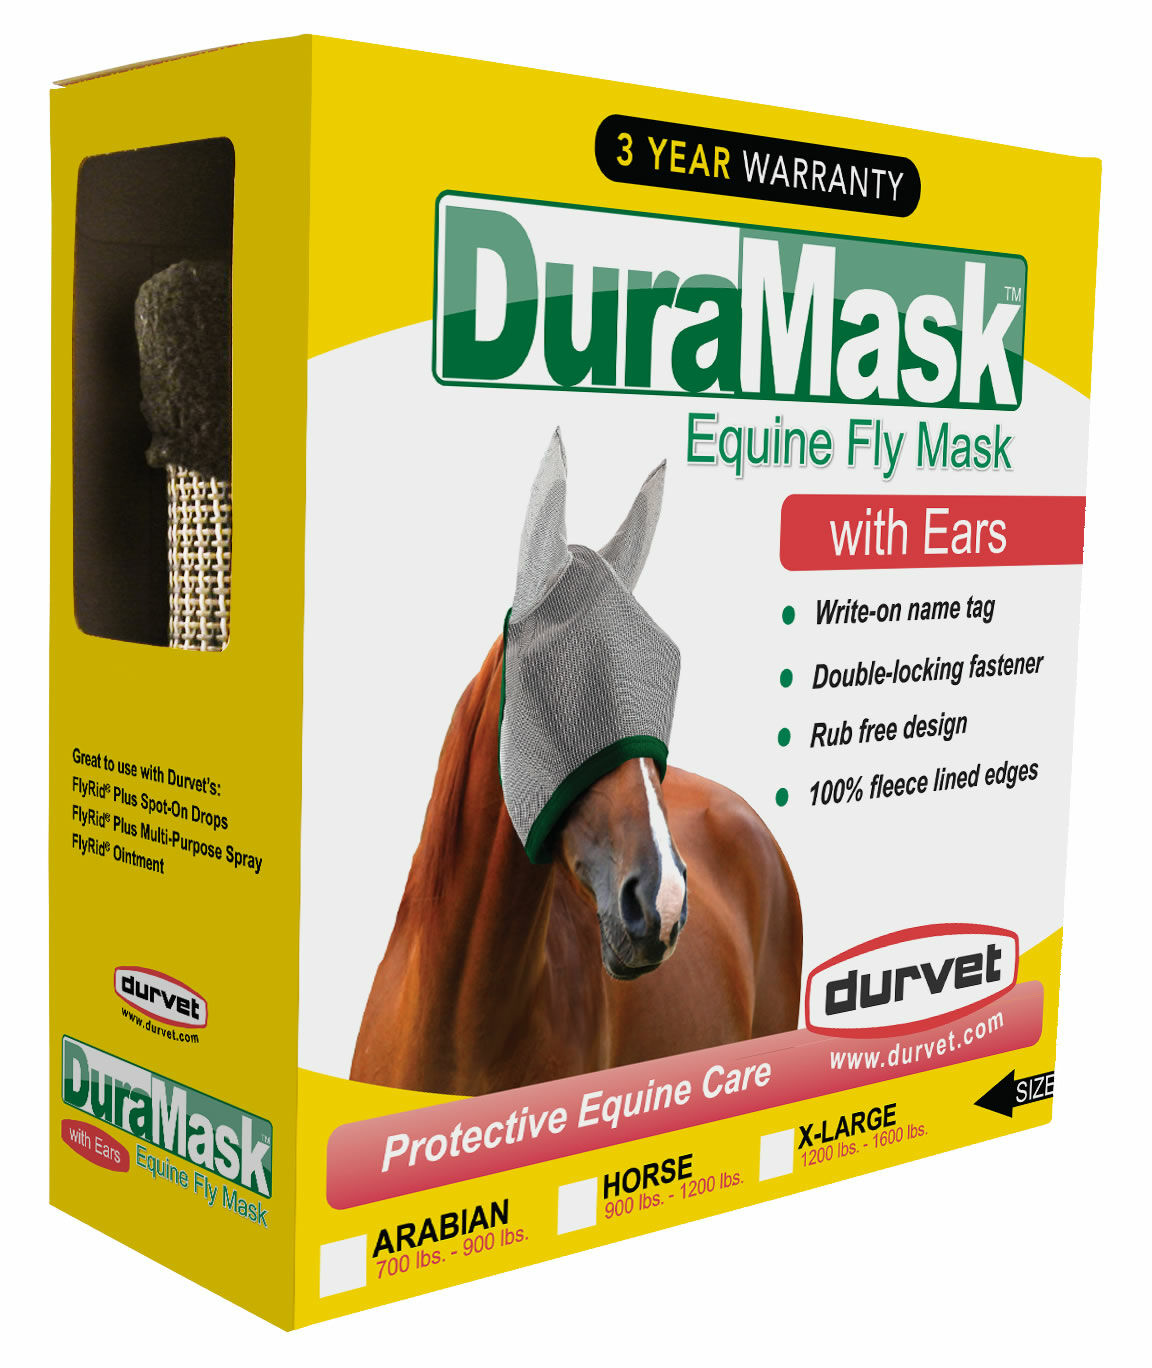 DuraMask with Ears